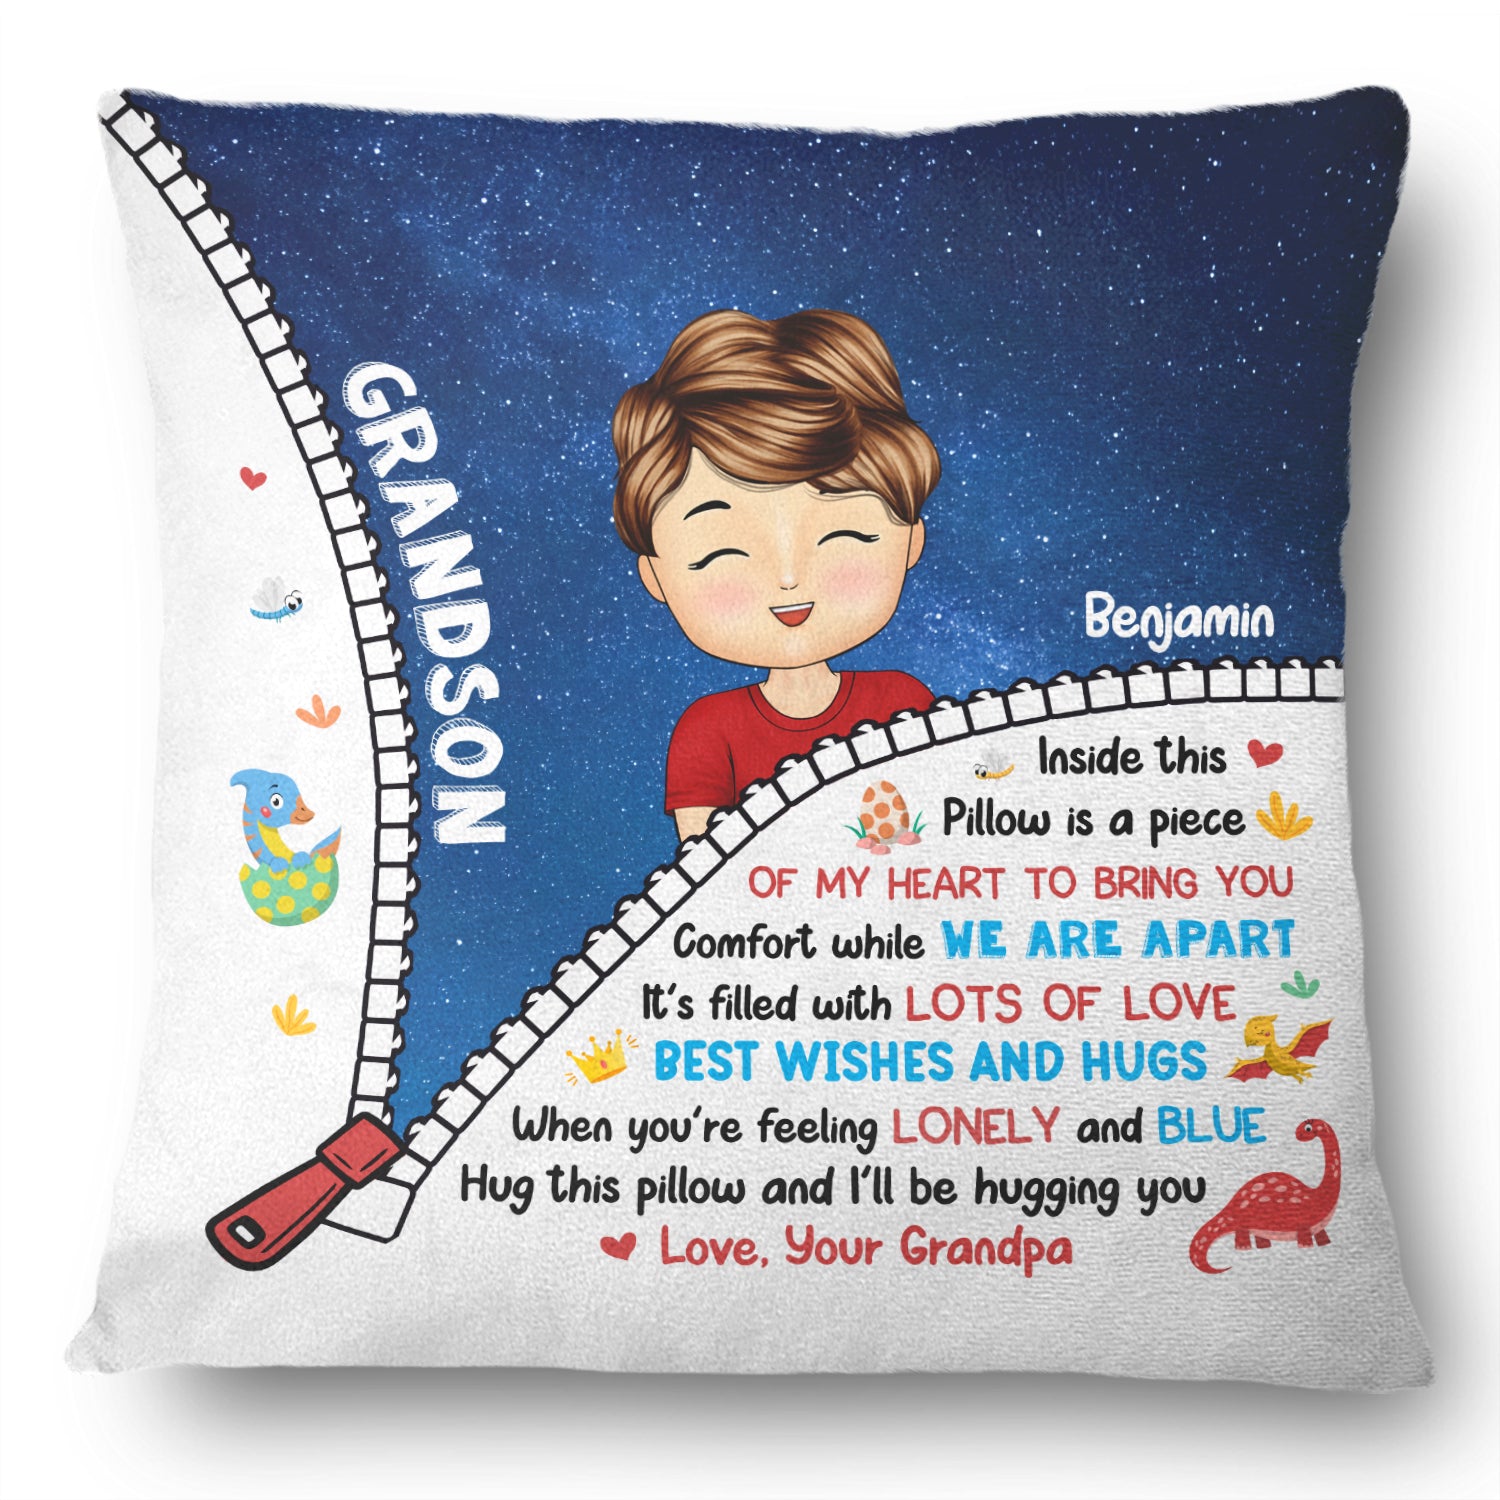 Hug This Pillow And I'll Be Hugging You - Gift For Granddaughter, Grandson, Kids - Personalized Pillow